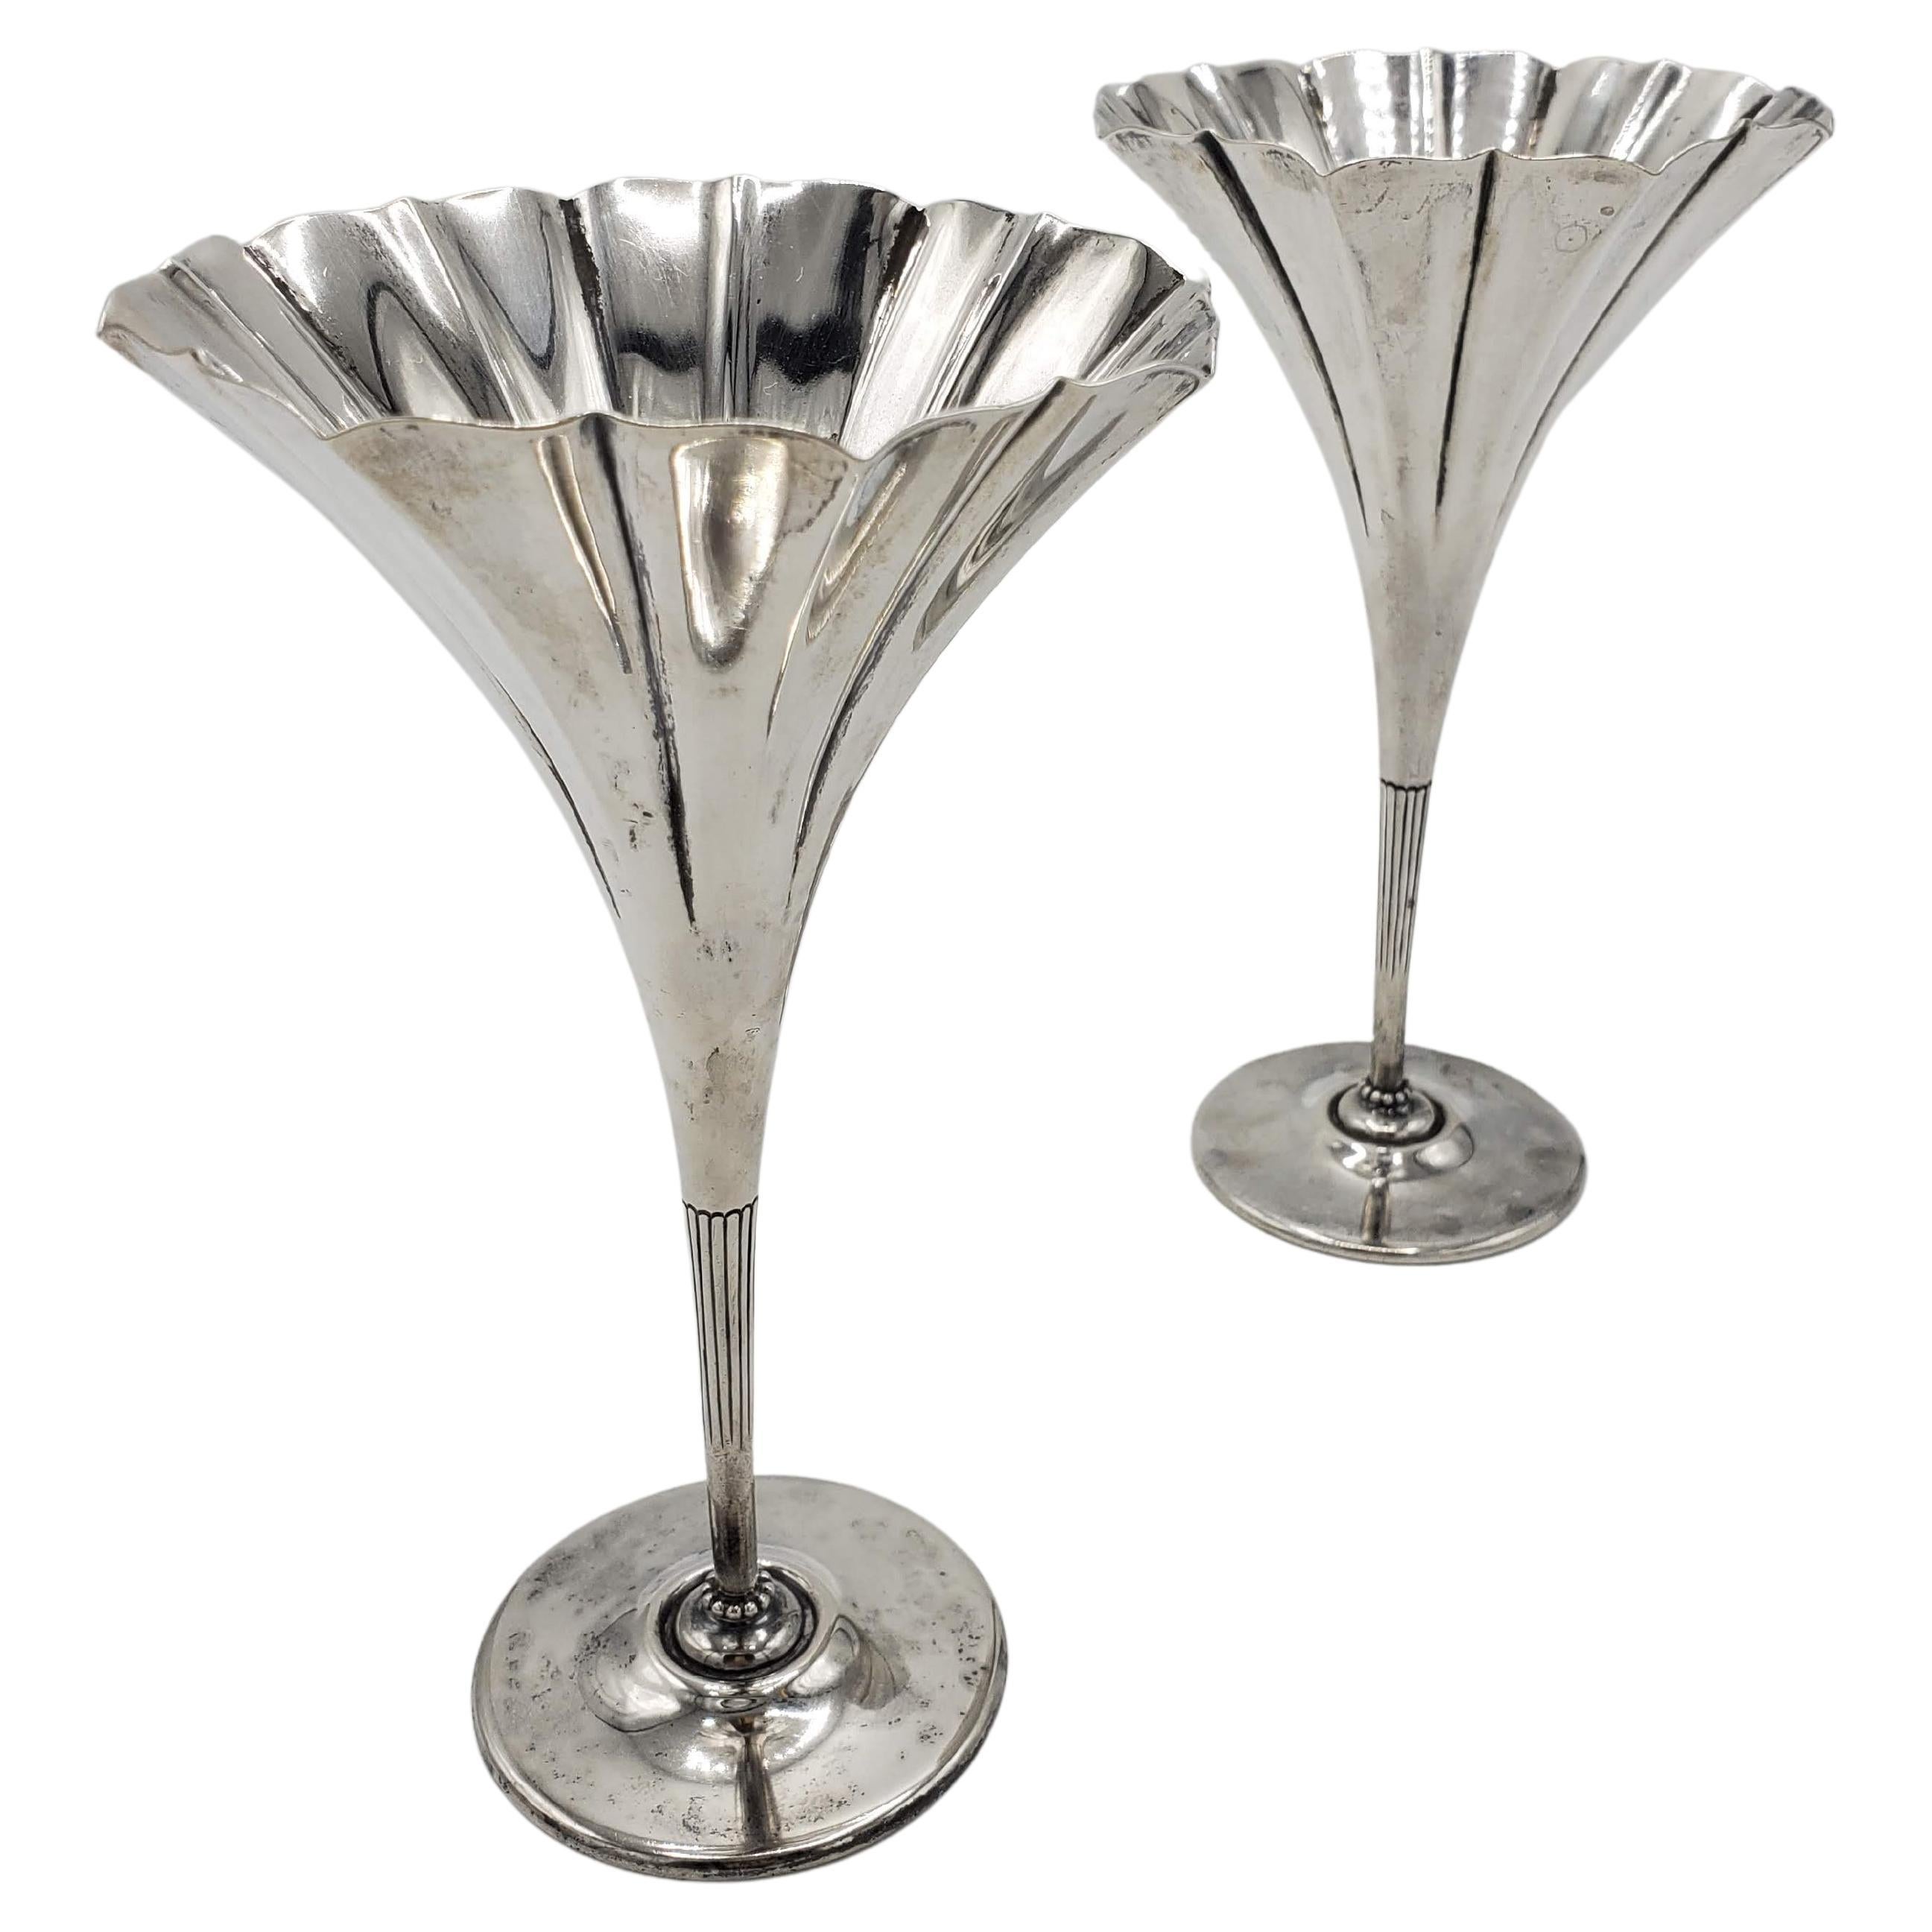 Pair of Small Tiffany & Co. Art Nouveau Sterling Silver Flower Shaped Vases